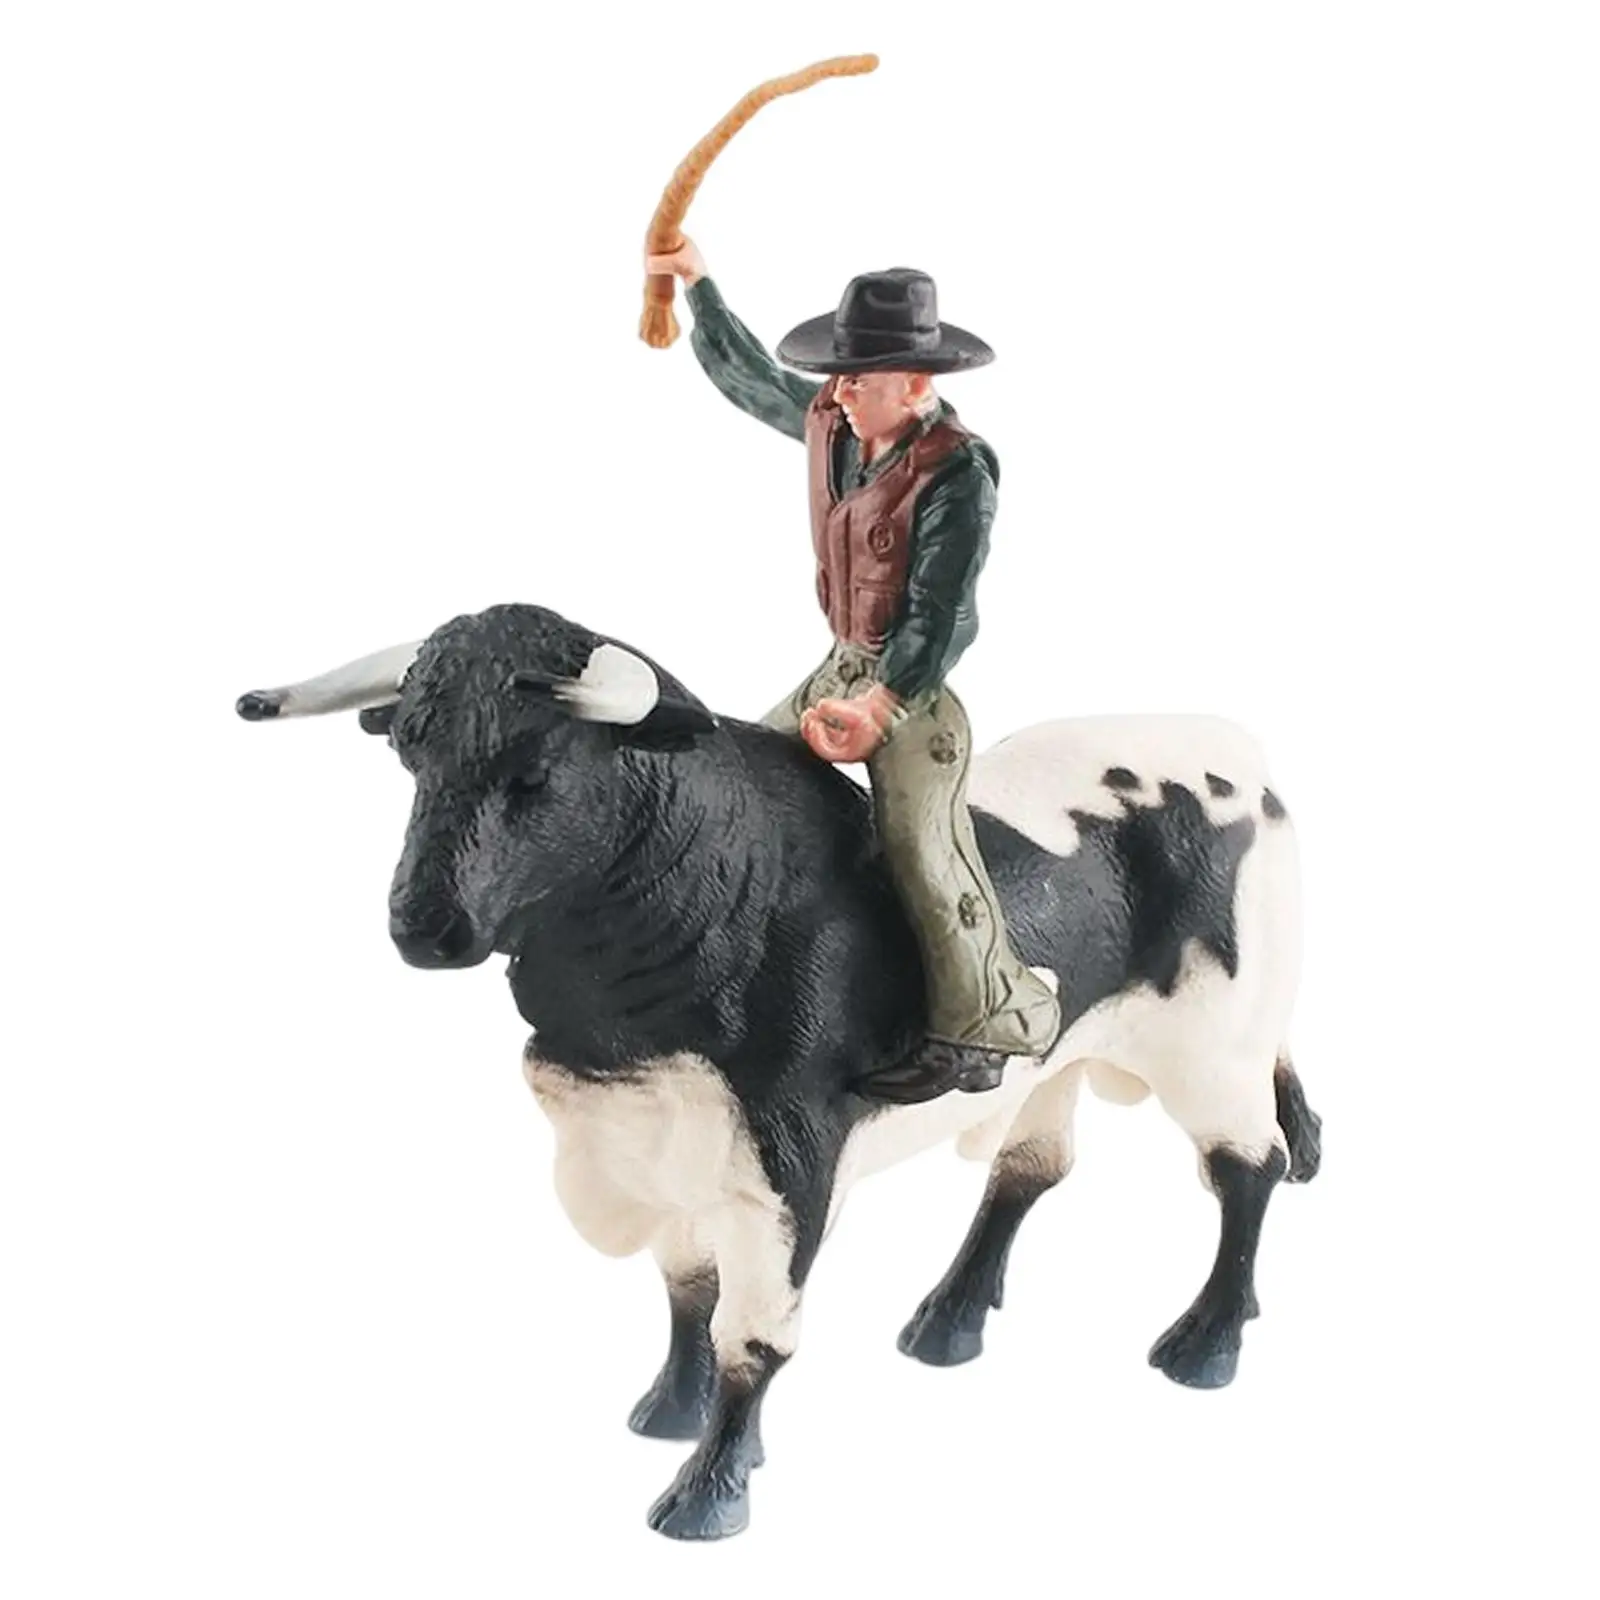 Hand Painted Bull with Rider Figurines Model Home Decor Party Favor Crafts Realistic Detailed Action Figures for Toddlers